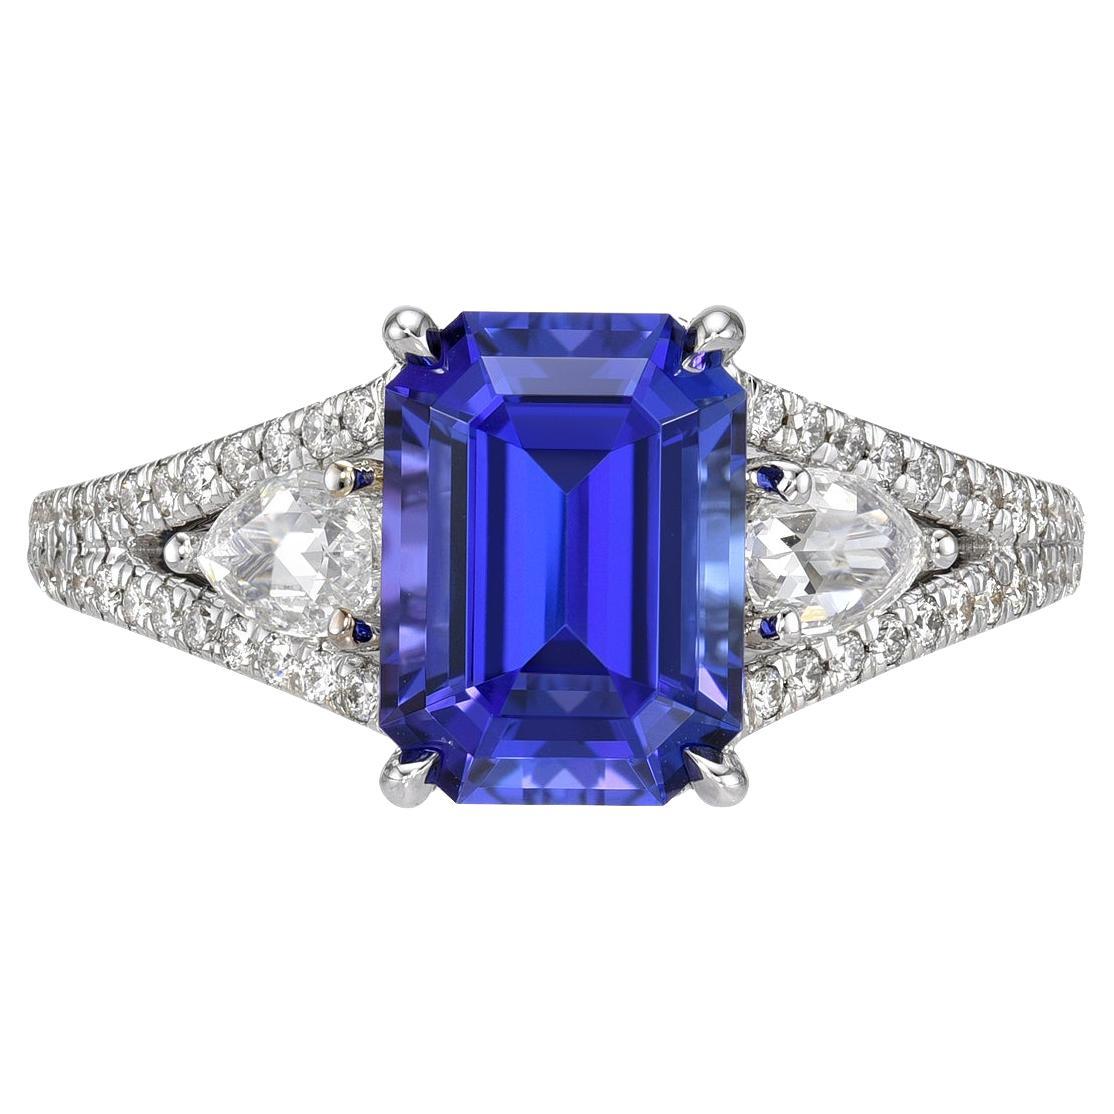 Captivating 2.56 carat Tanzanite Emerald Cut, 18K white gold ring, decorated with a total of 0.10 carat baguette diamonds, a pair of 0.27 carat Rose Cut pear shape diamonds, and a total of 0.23 carat round brilliant diamonds.
Ring size 6.5. Resizing